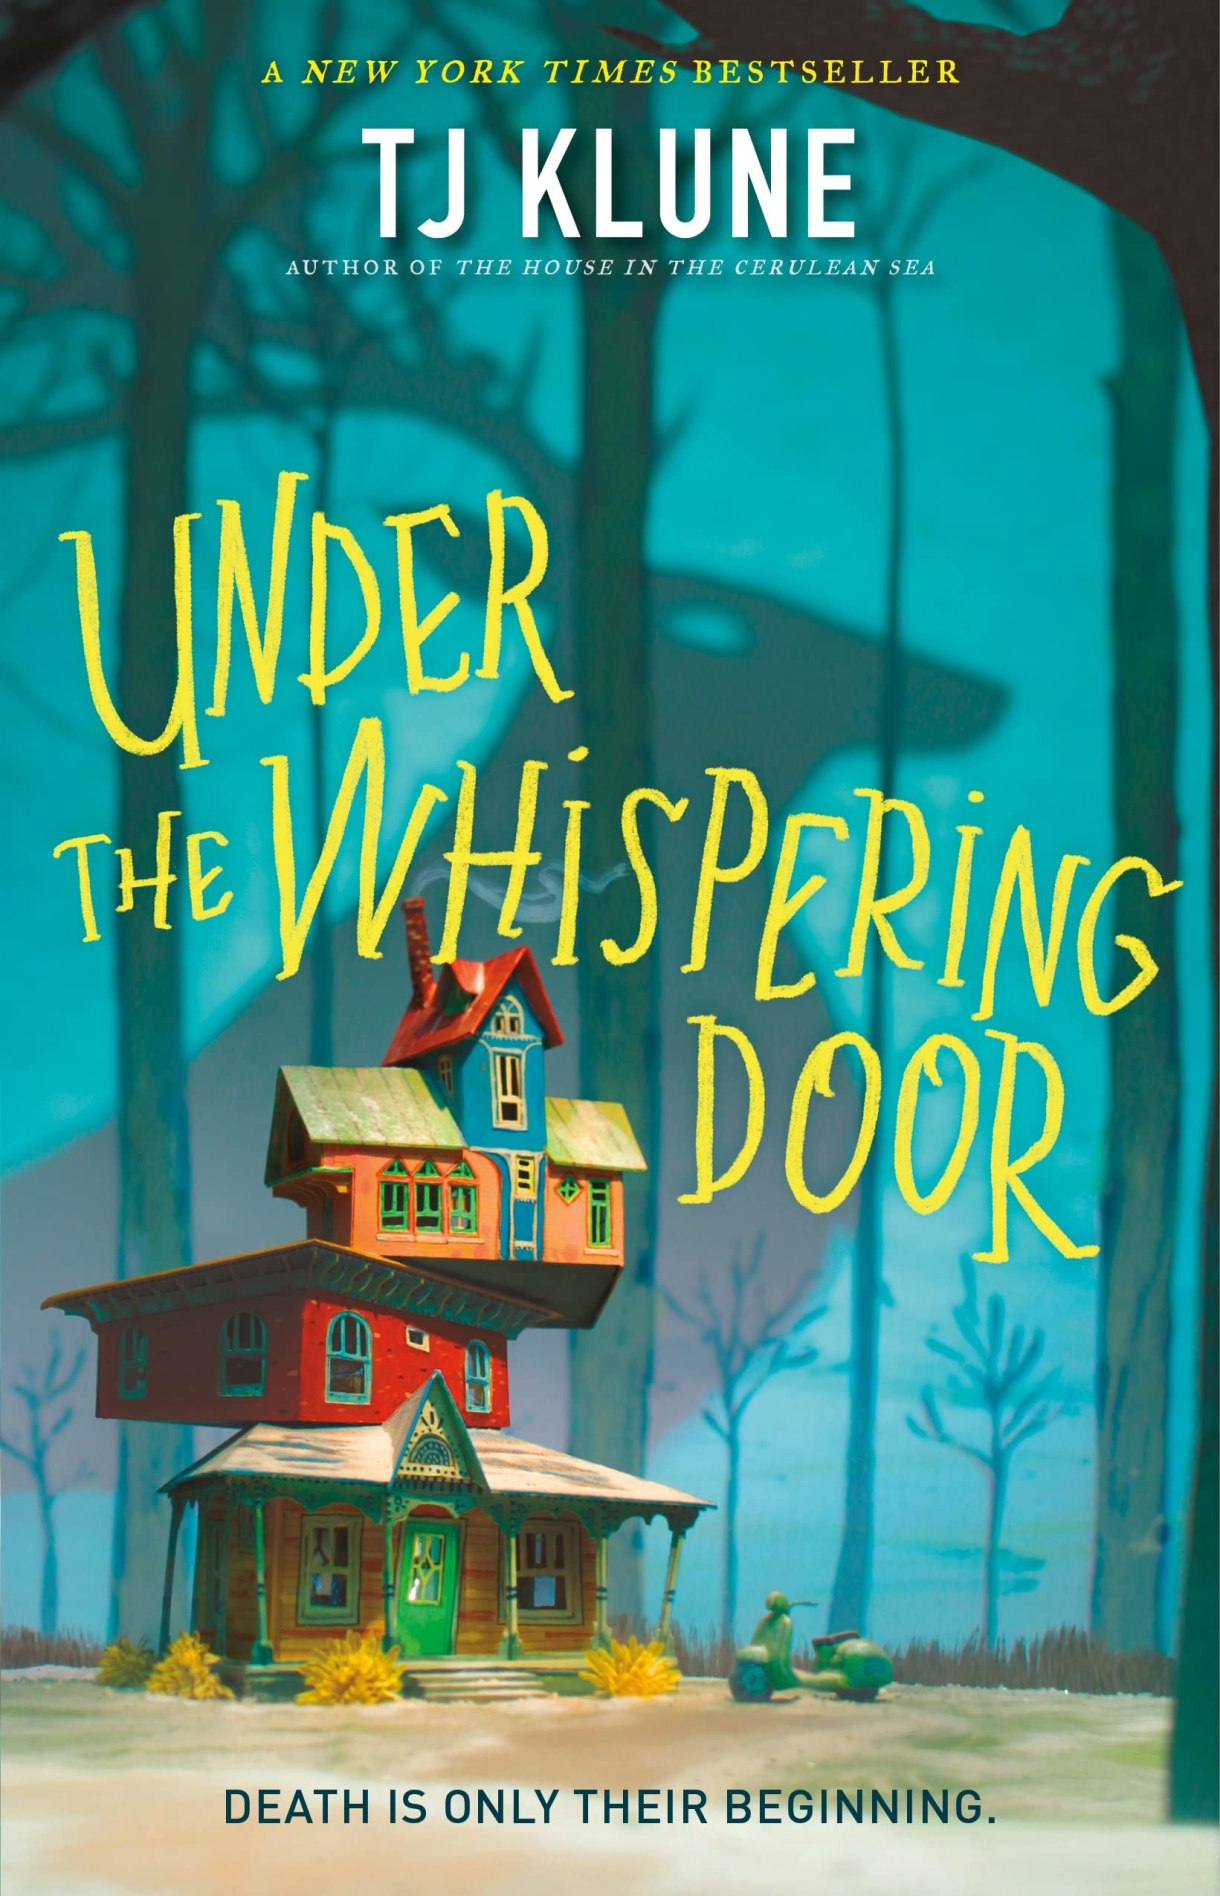 The cover of "Under the Whispering Door" which has an illustration of an oddly stacked house located within a forest with the shadow of a deer in the background.